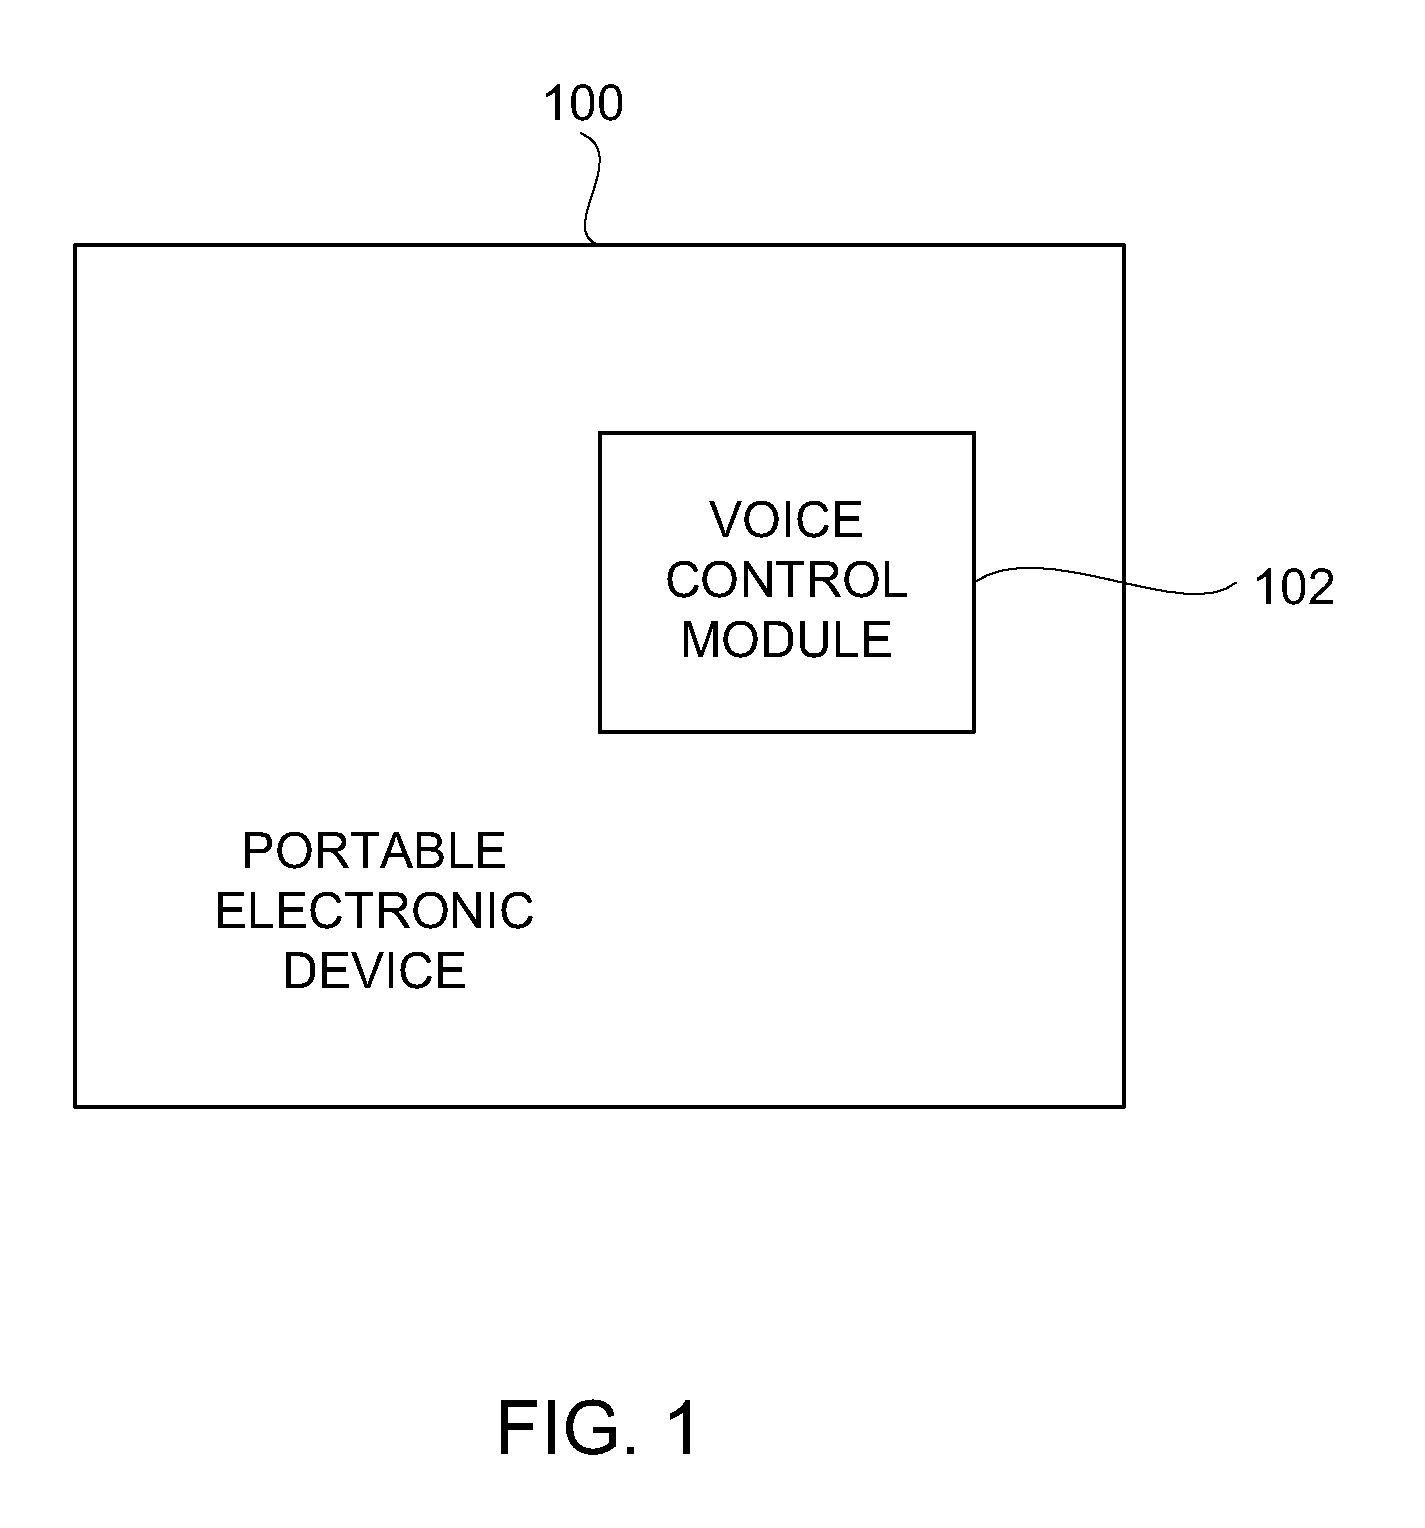 Method and System for Operating a Multi-Function Portable Electronic Device Using Voice-Activation